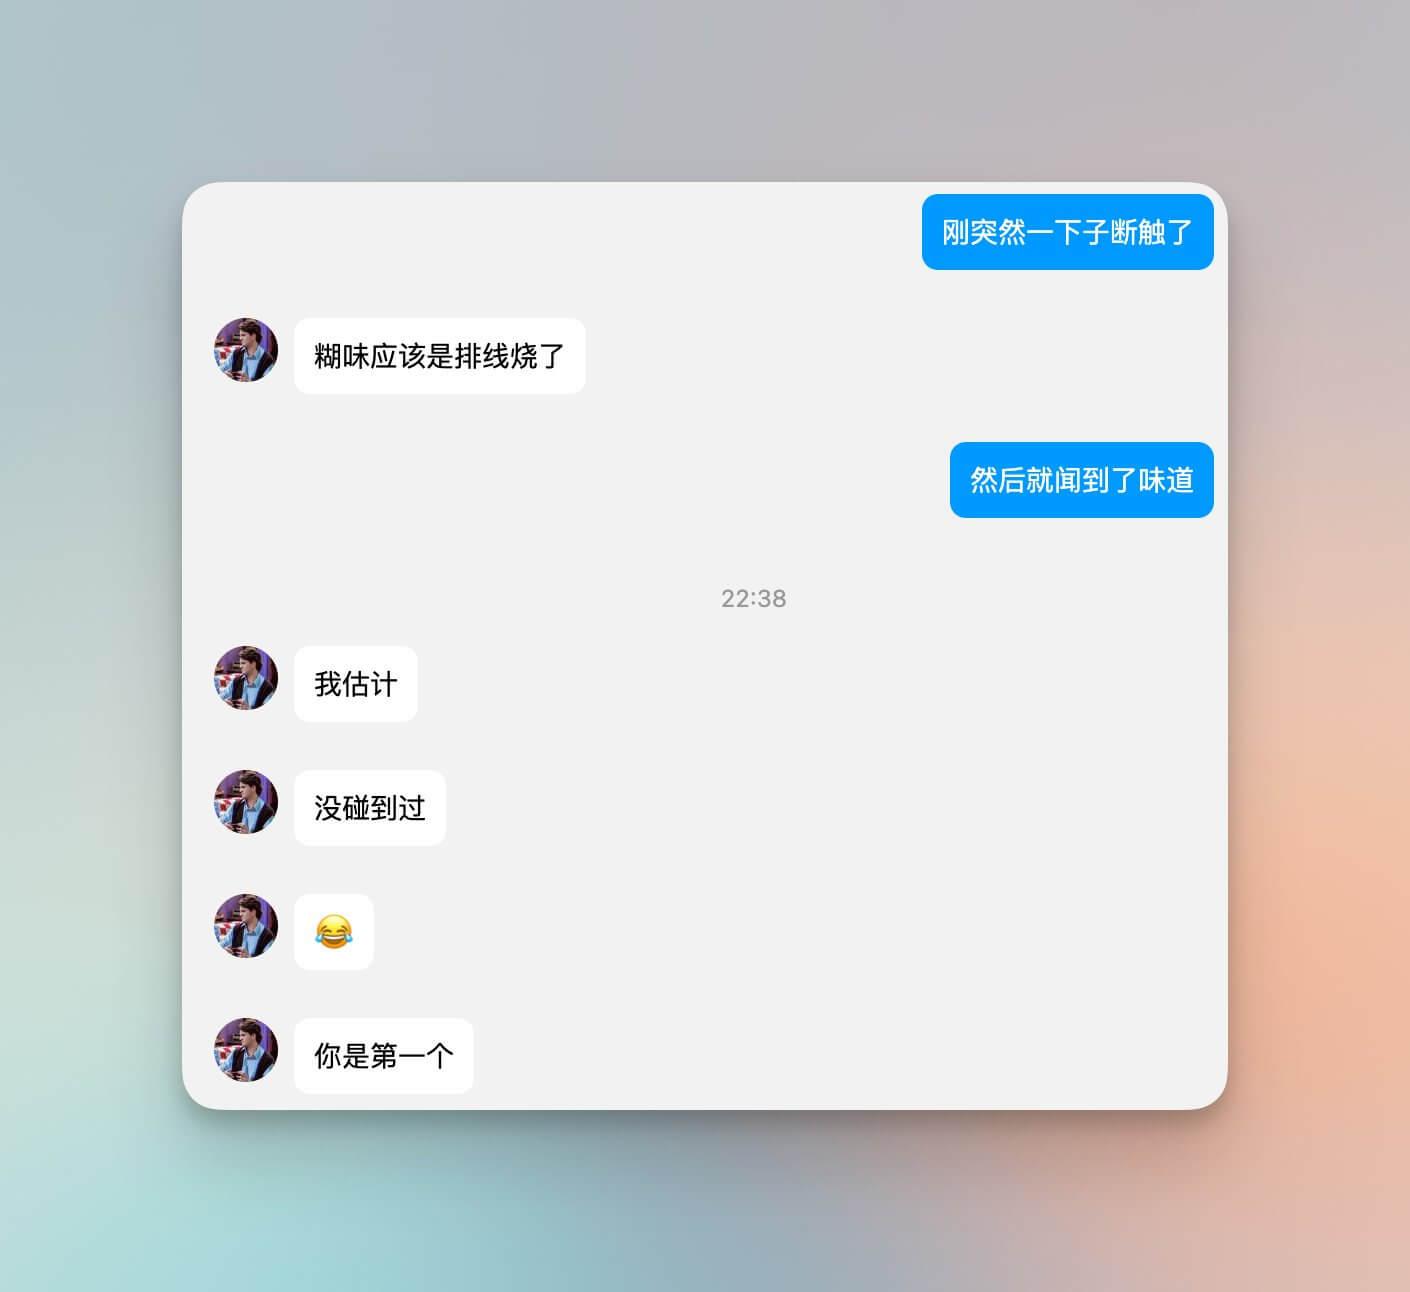 hanwen_chat_with_support